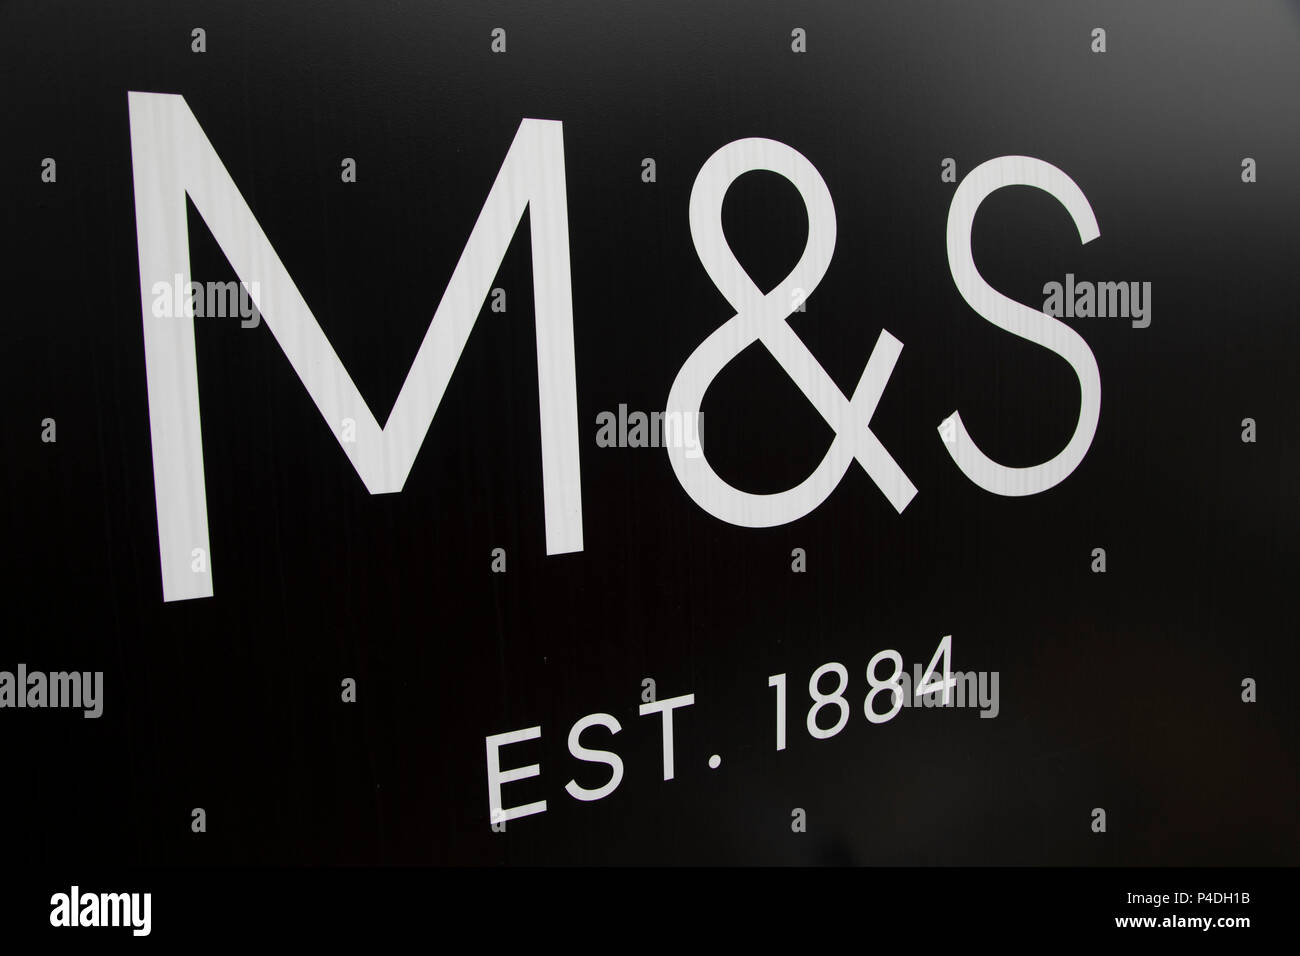 Sign for department store and supermarket chain Marks and Spencer in Birmingham, United Kingdom. Marks & Spencer Group plc, also known as M&S, is a major British multinational retailer and specialises in the selling of clothing, home products and luxury food products. Stock Photo